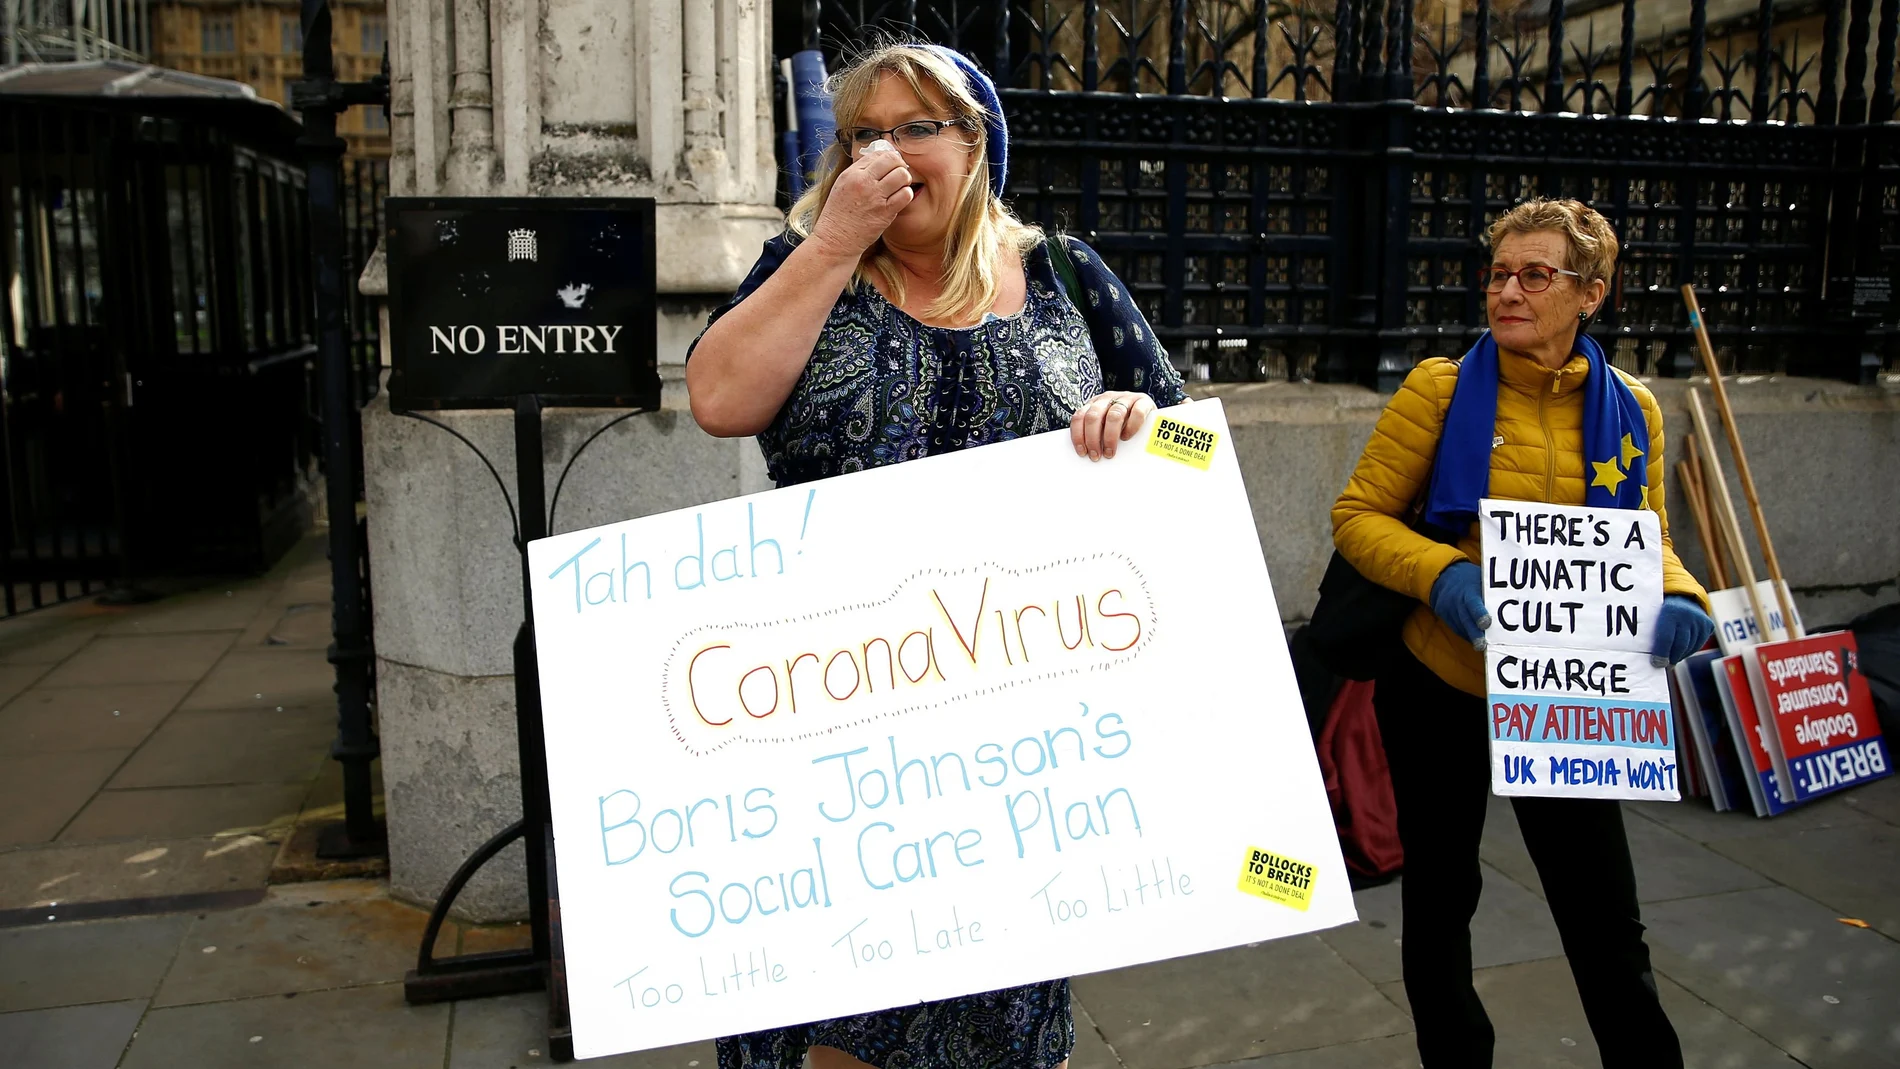 A protester holding a placard stands outside the Houses of Parliament, following an outbreak of the coronavirus, in London